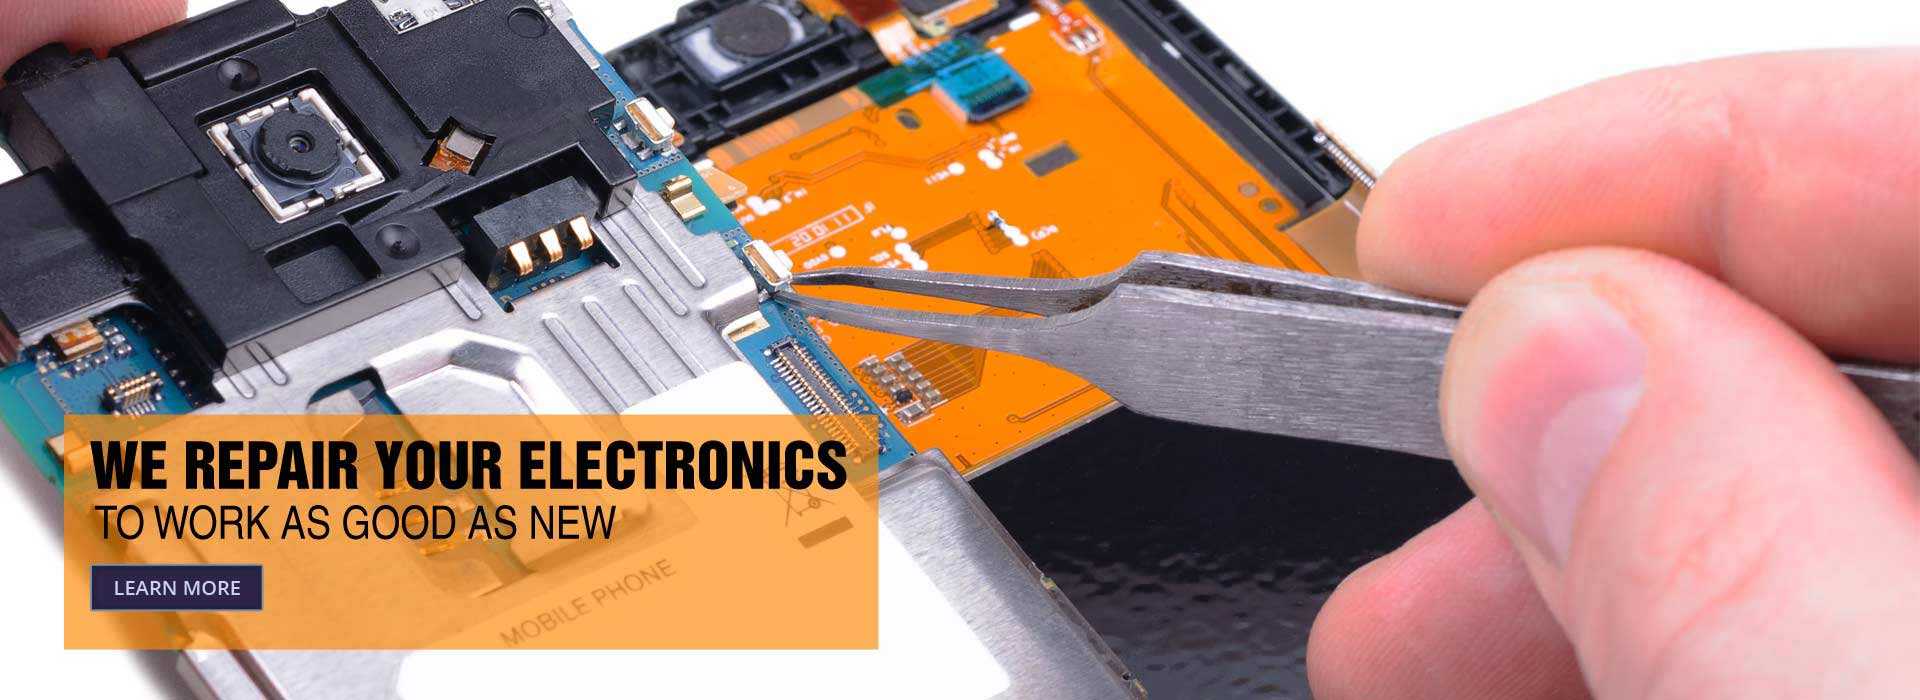 We repair your electronics to work as good as new